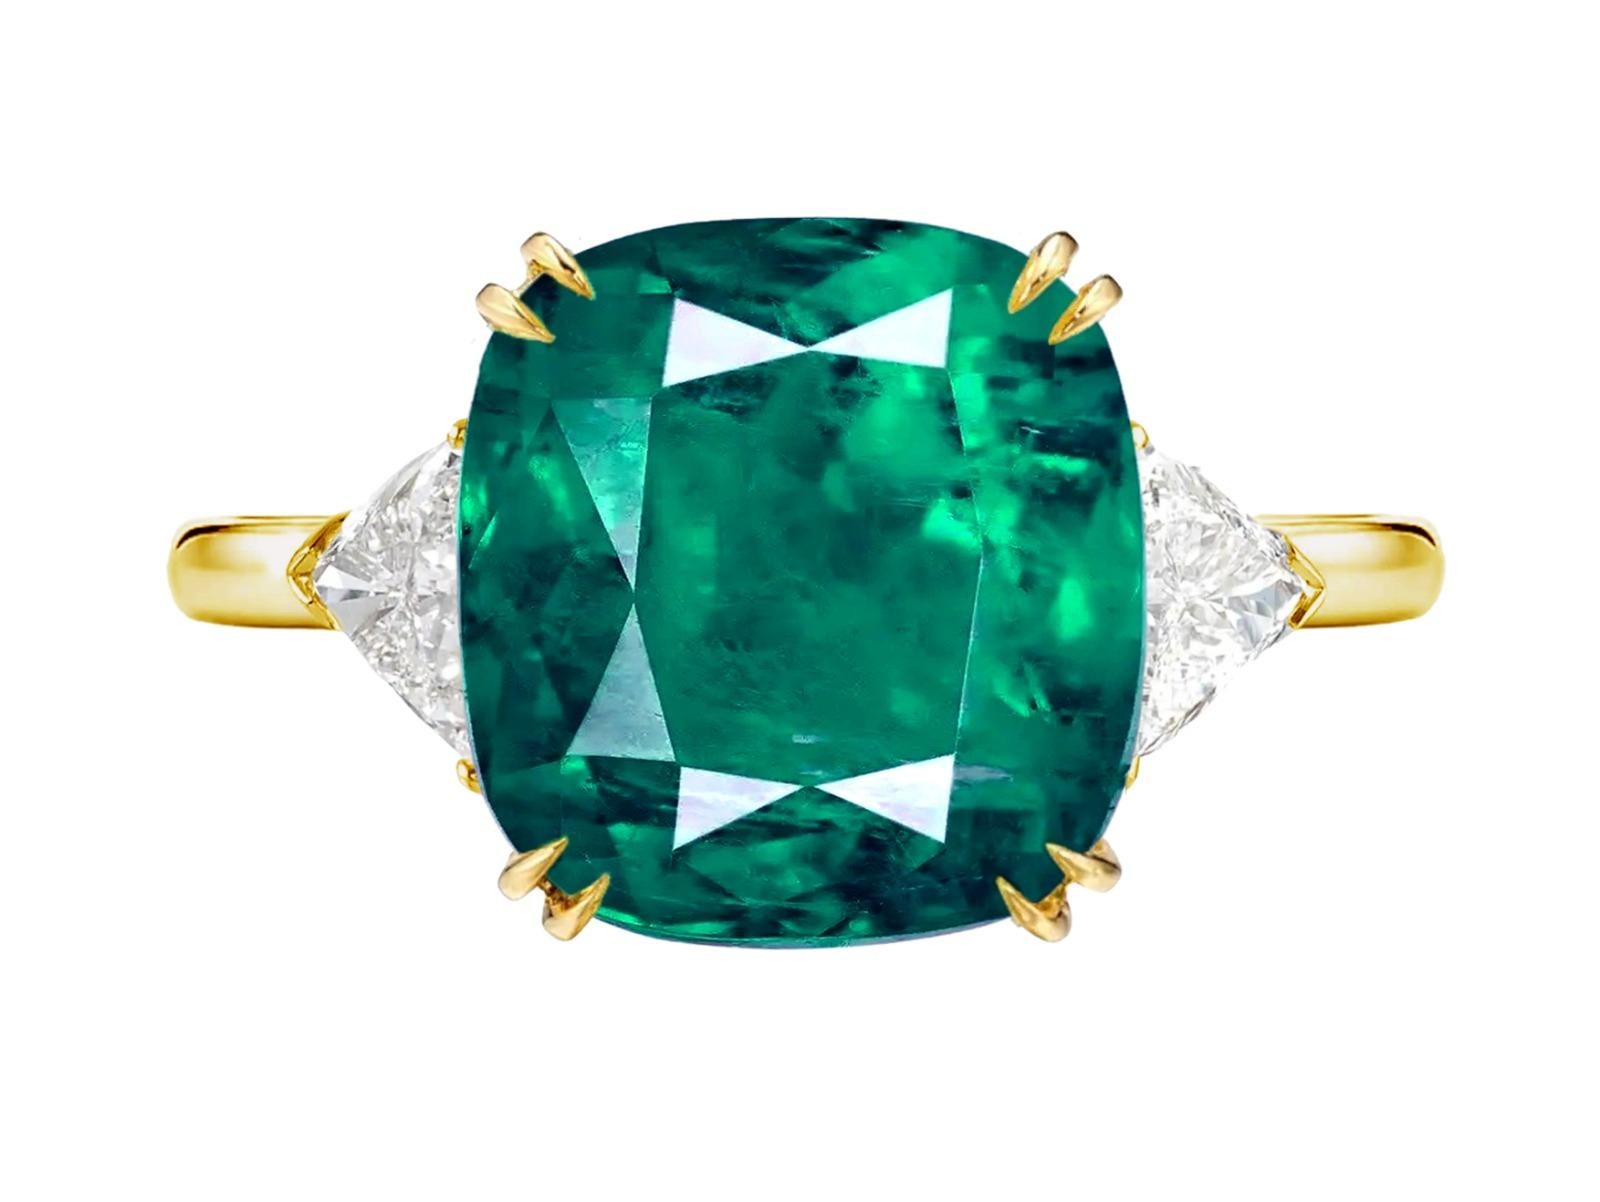 An exquisite Colombian cushion vivid green emerald ring boasts a sought-after gemstone. Colombian emeralds are famed for their pure, rich greens and considered especially beautiful. 

Here it’s fashioned into a cushion cut stone which showcases its